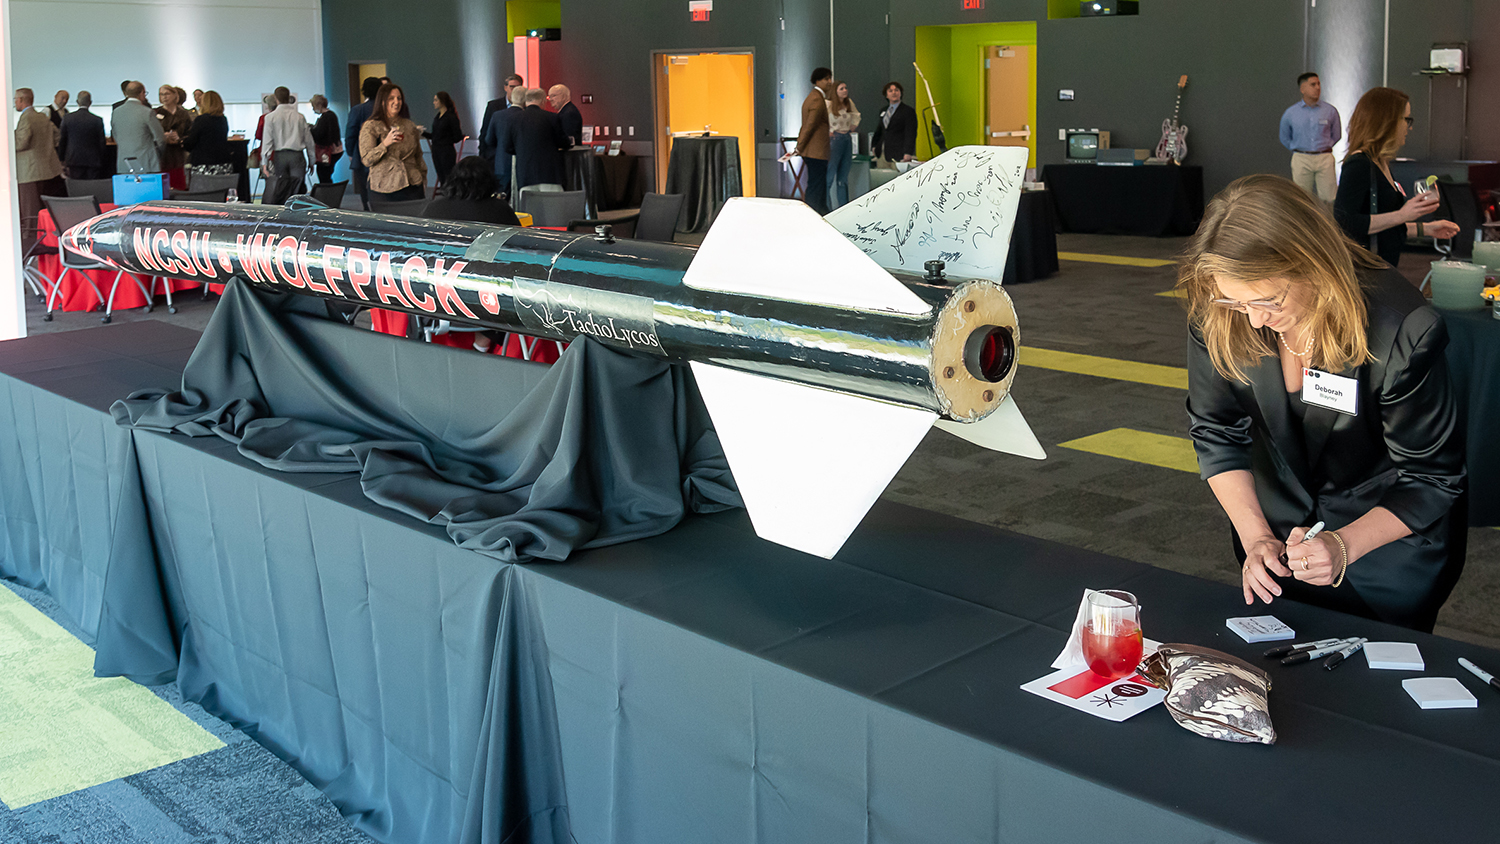 During the College of Engineering 100 year celebation, a woman completes a small registration form next to a large scale model rocket used by the NC State rocketry club.